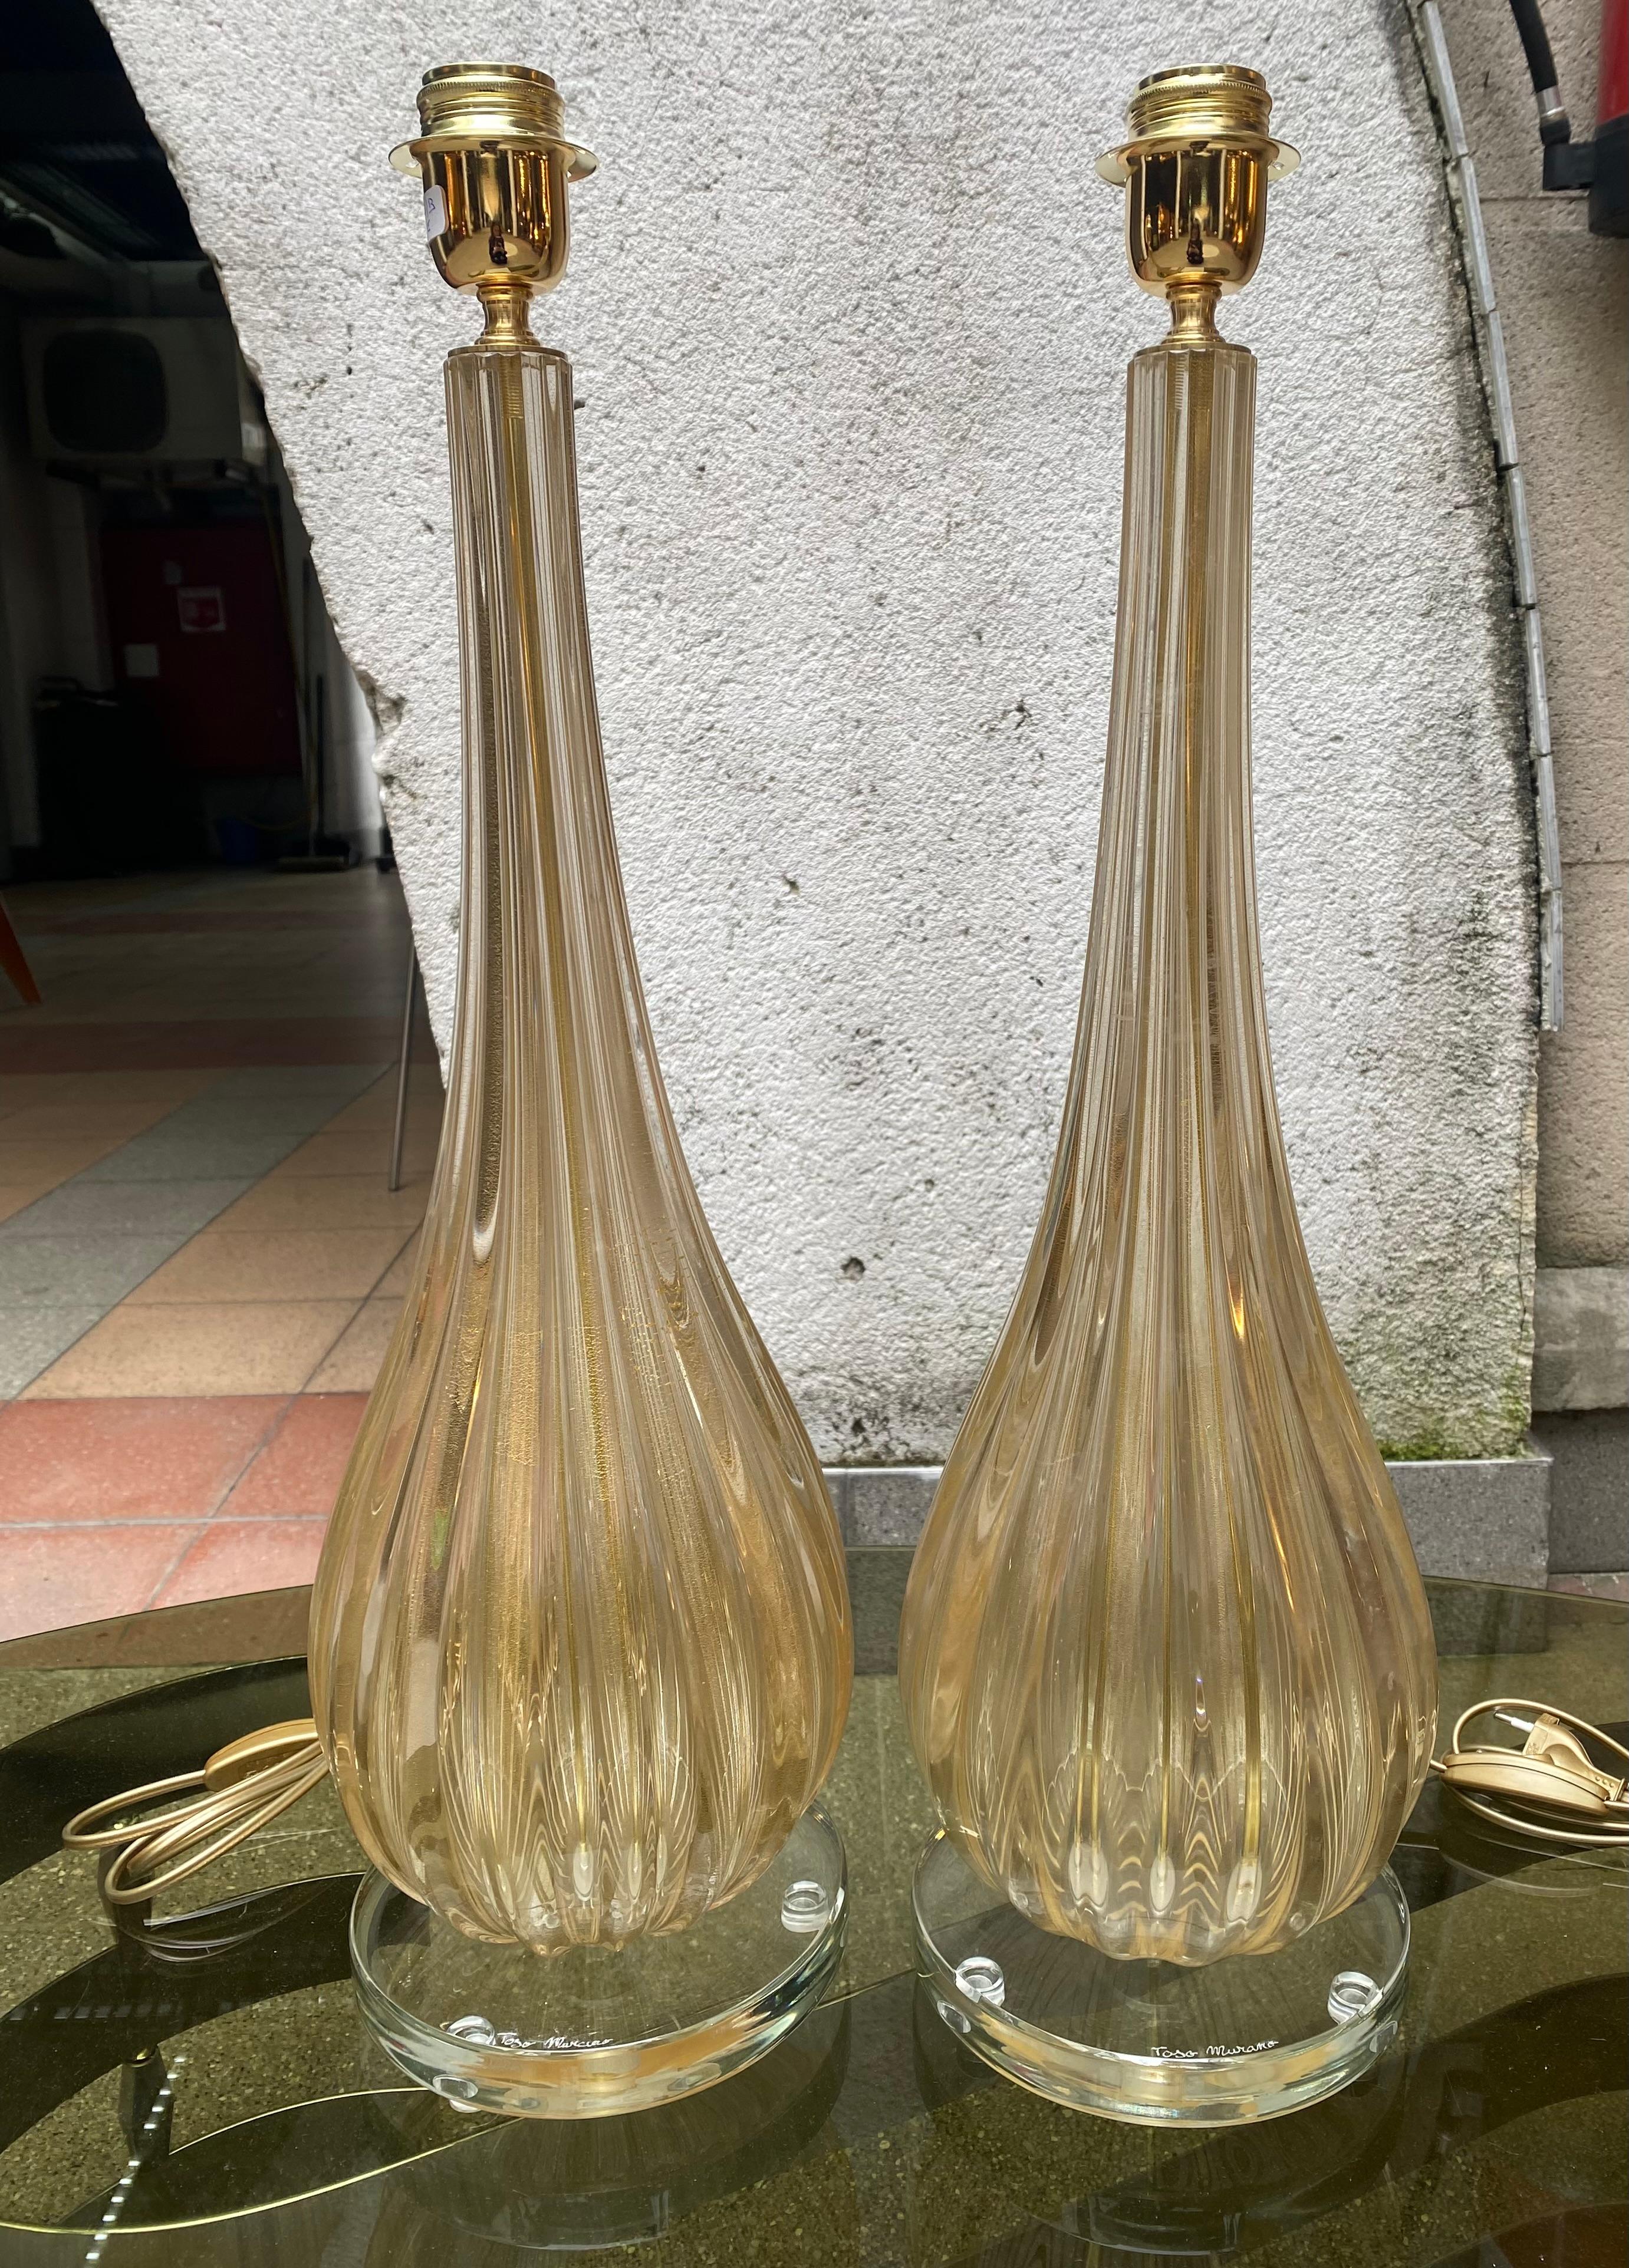 Pair of Toso Murano lamps
Murano glass 
Gold 
Dimensions : h62xl20cm
ref : c/1942/2/B
Price : 3200€ for the pair.